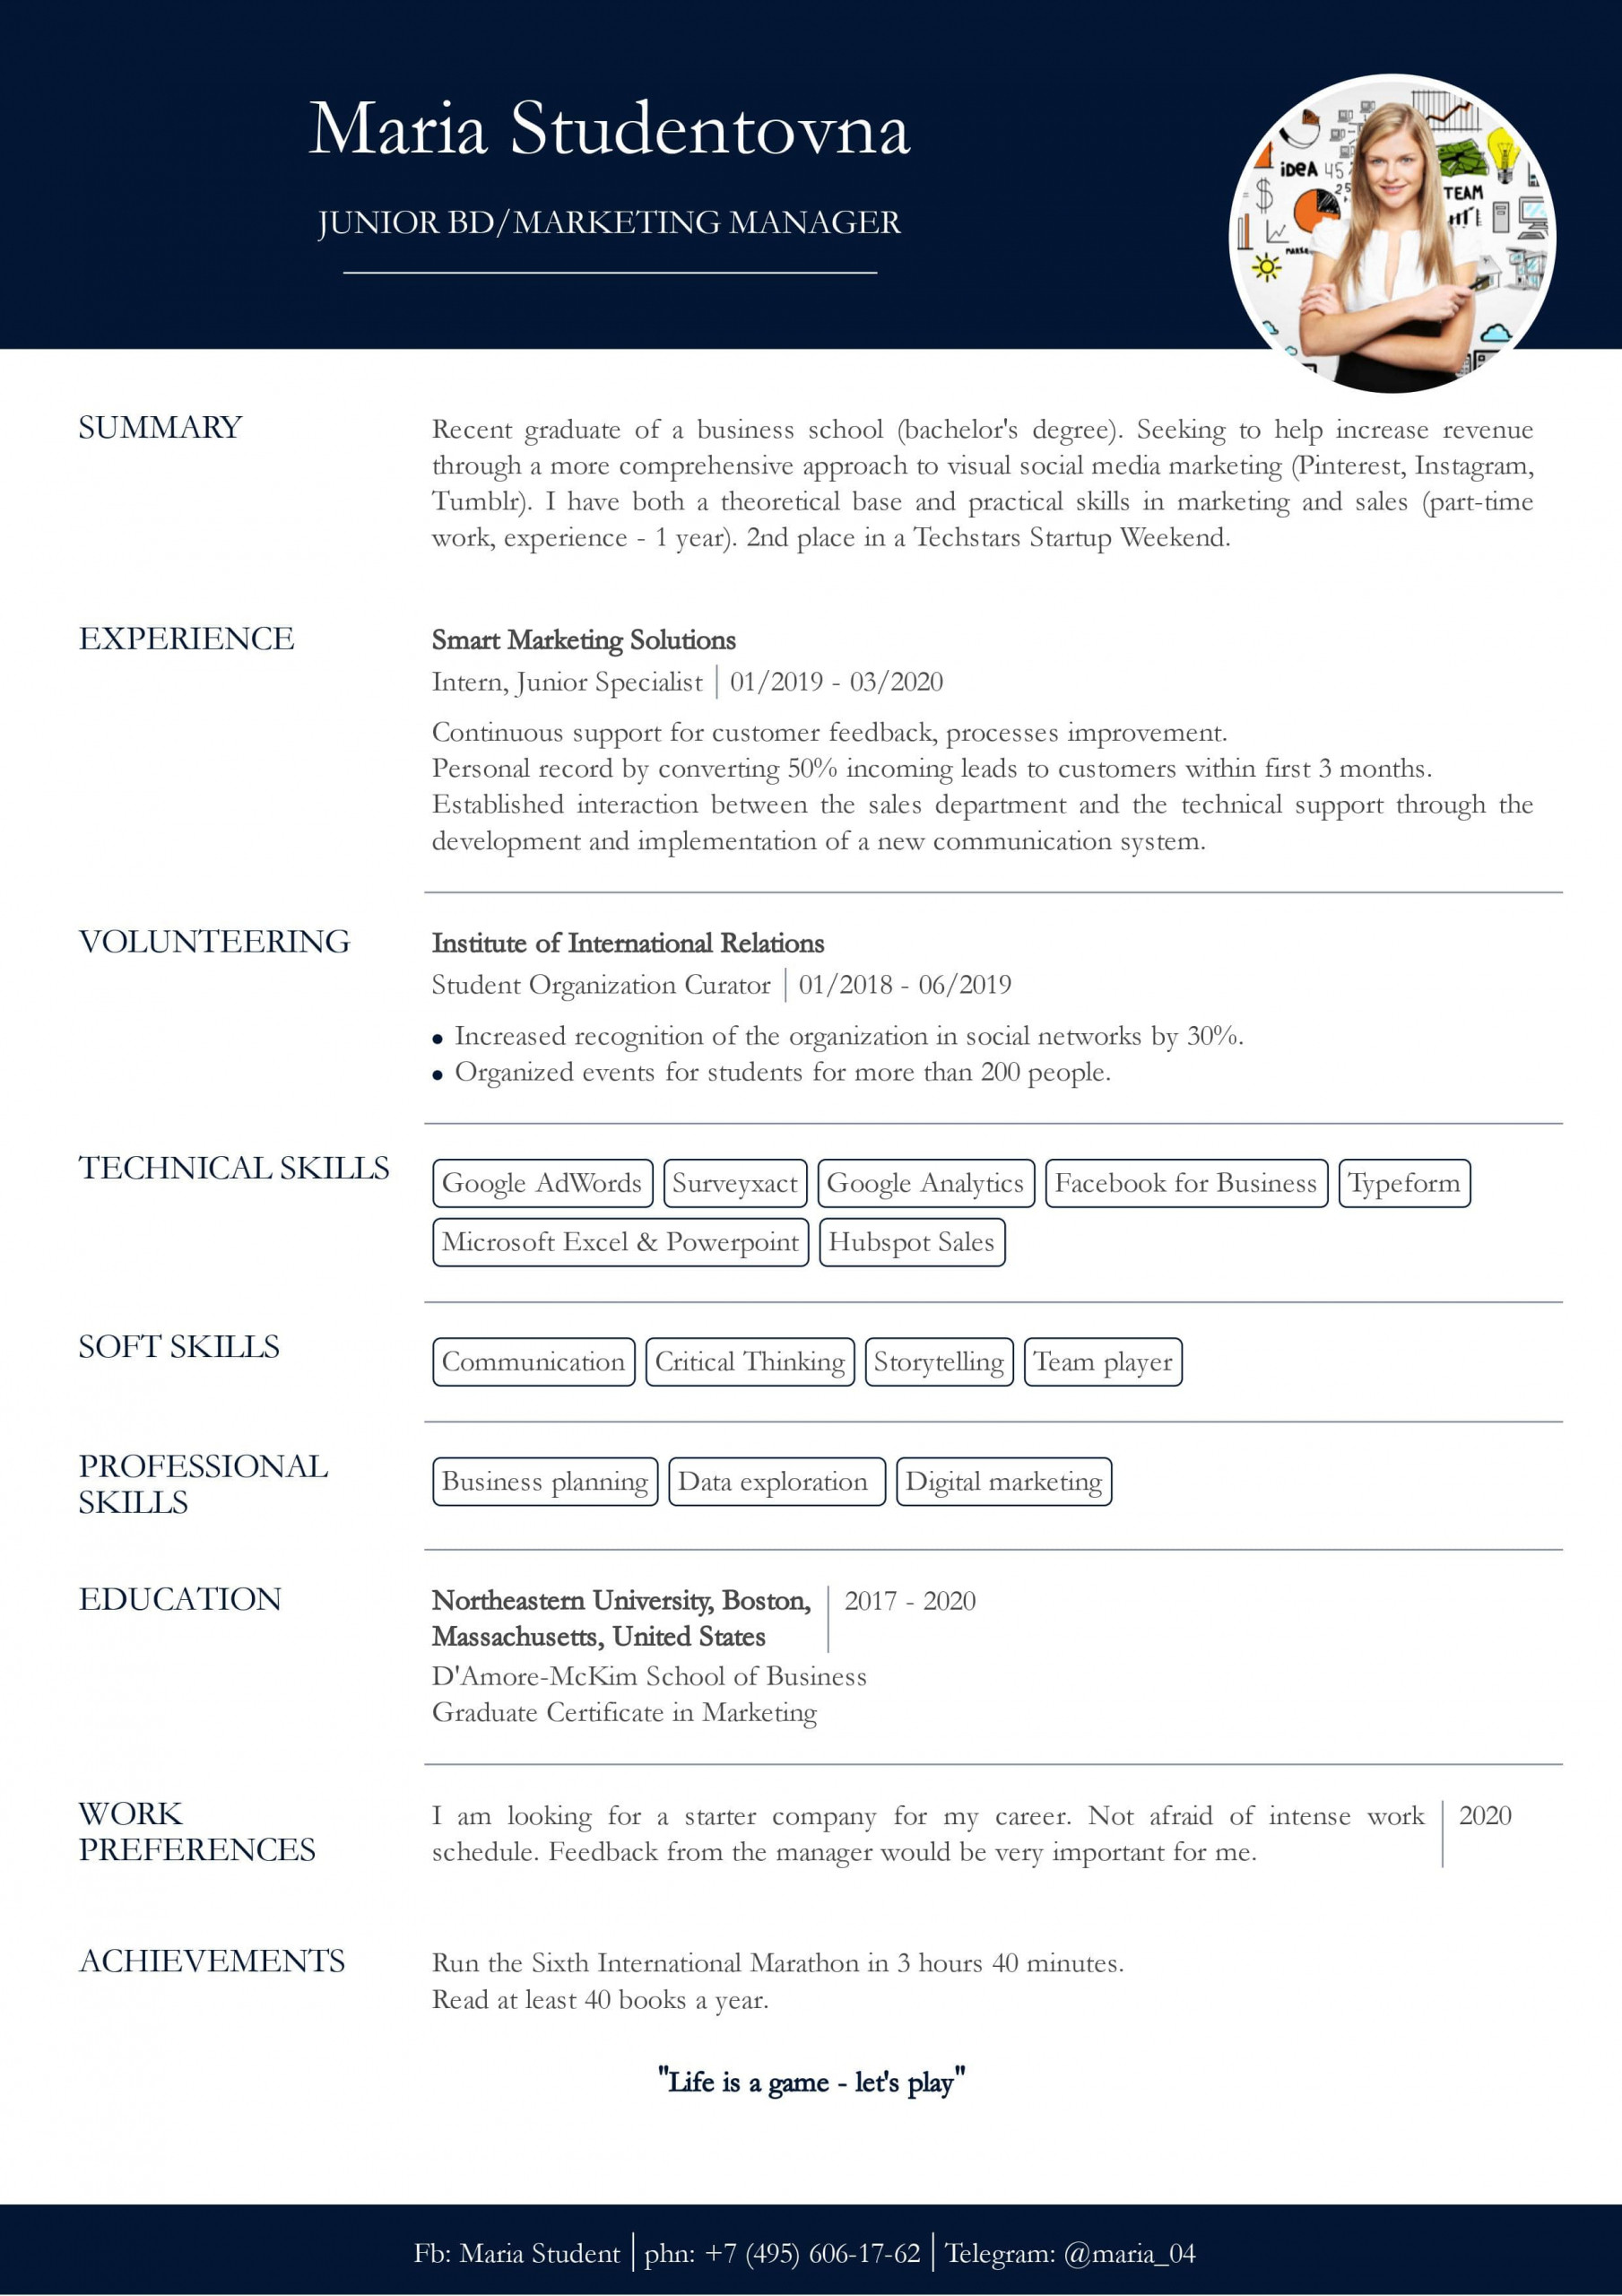 Free Resume Template for Teenager with No Experience Resume with No Work Experience. Sample for Students. – Cv2you Blog